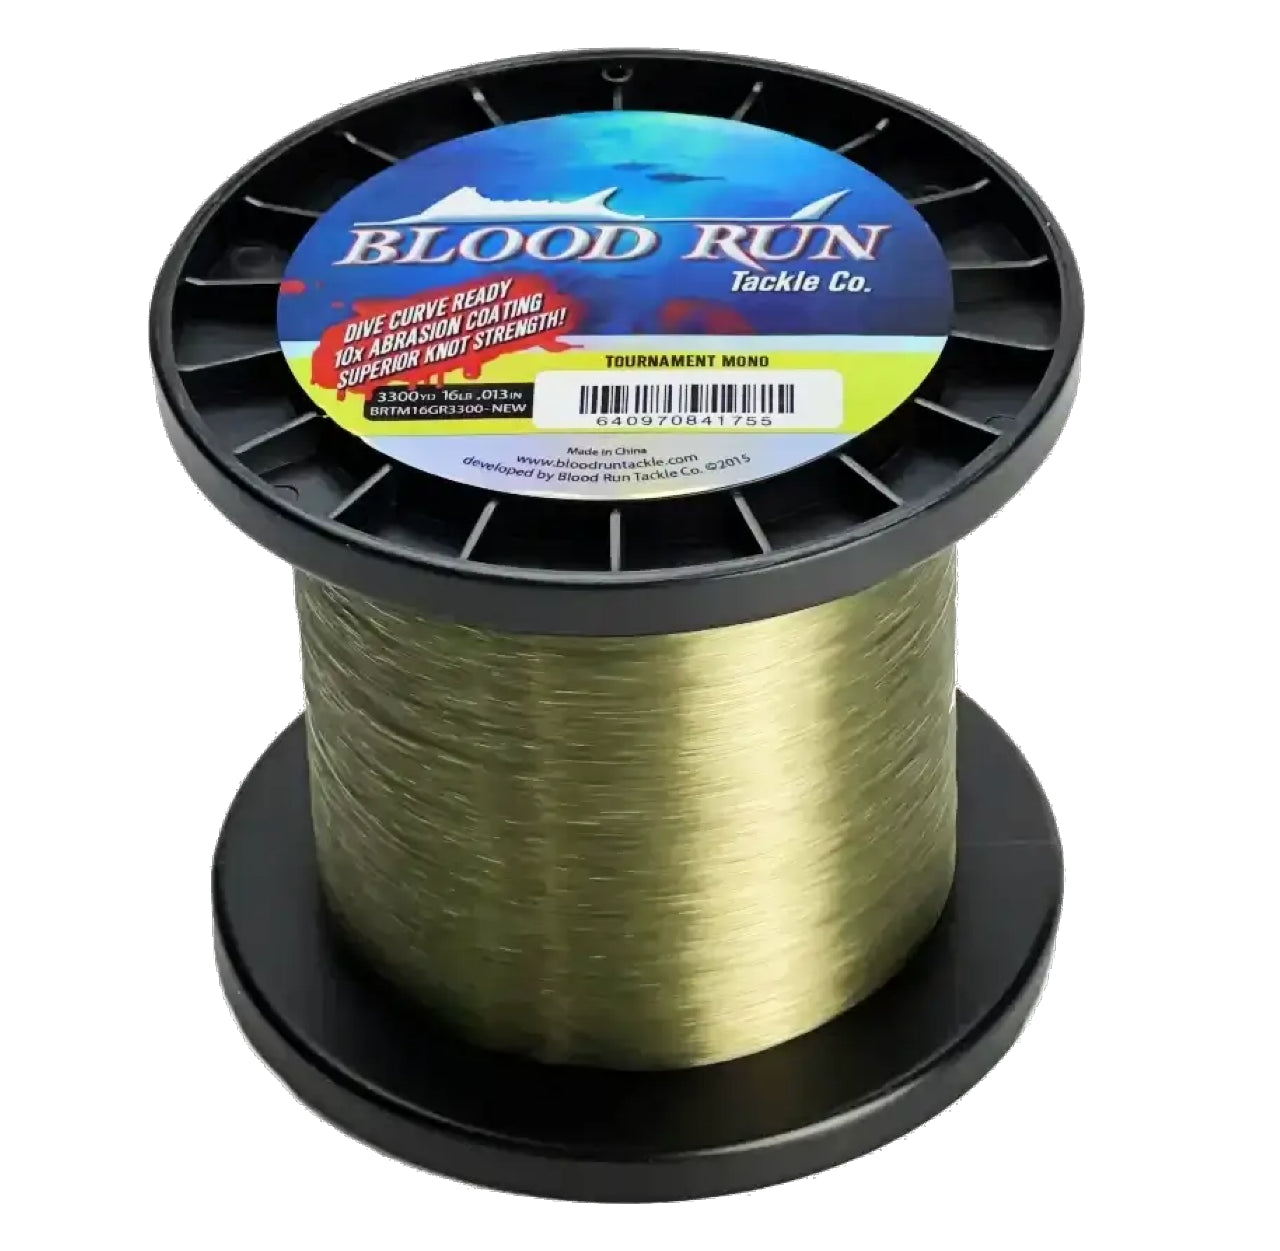 Weighted Steel Stainless Fishing Wire Line Blood Run Fishing